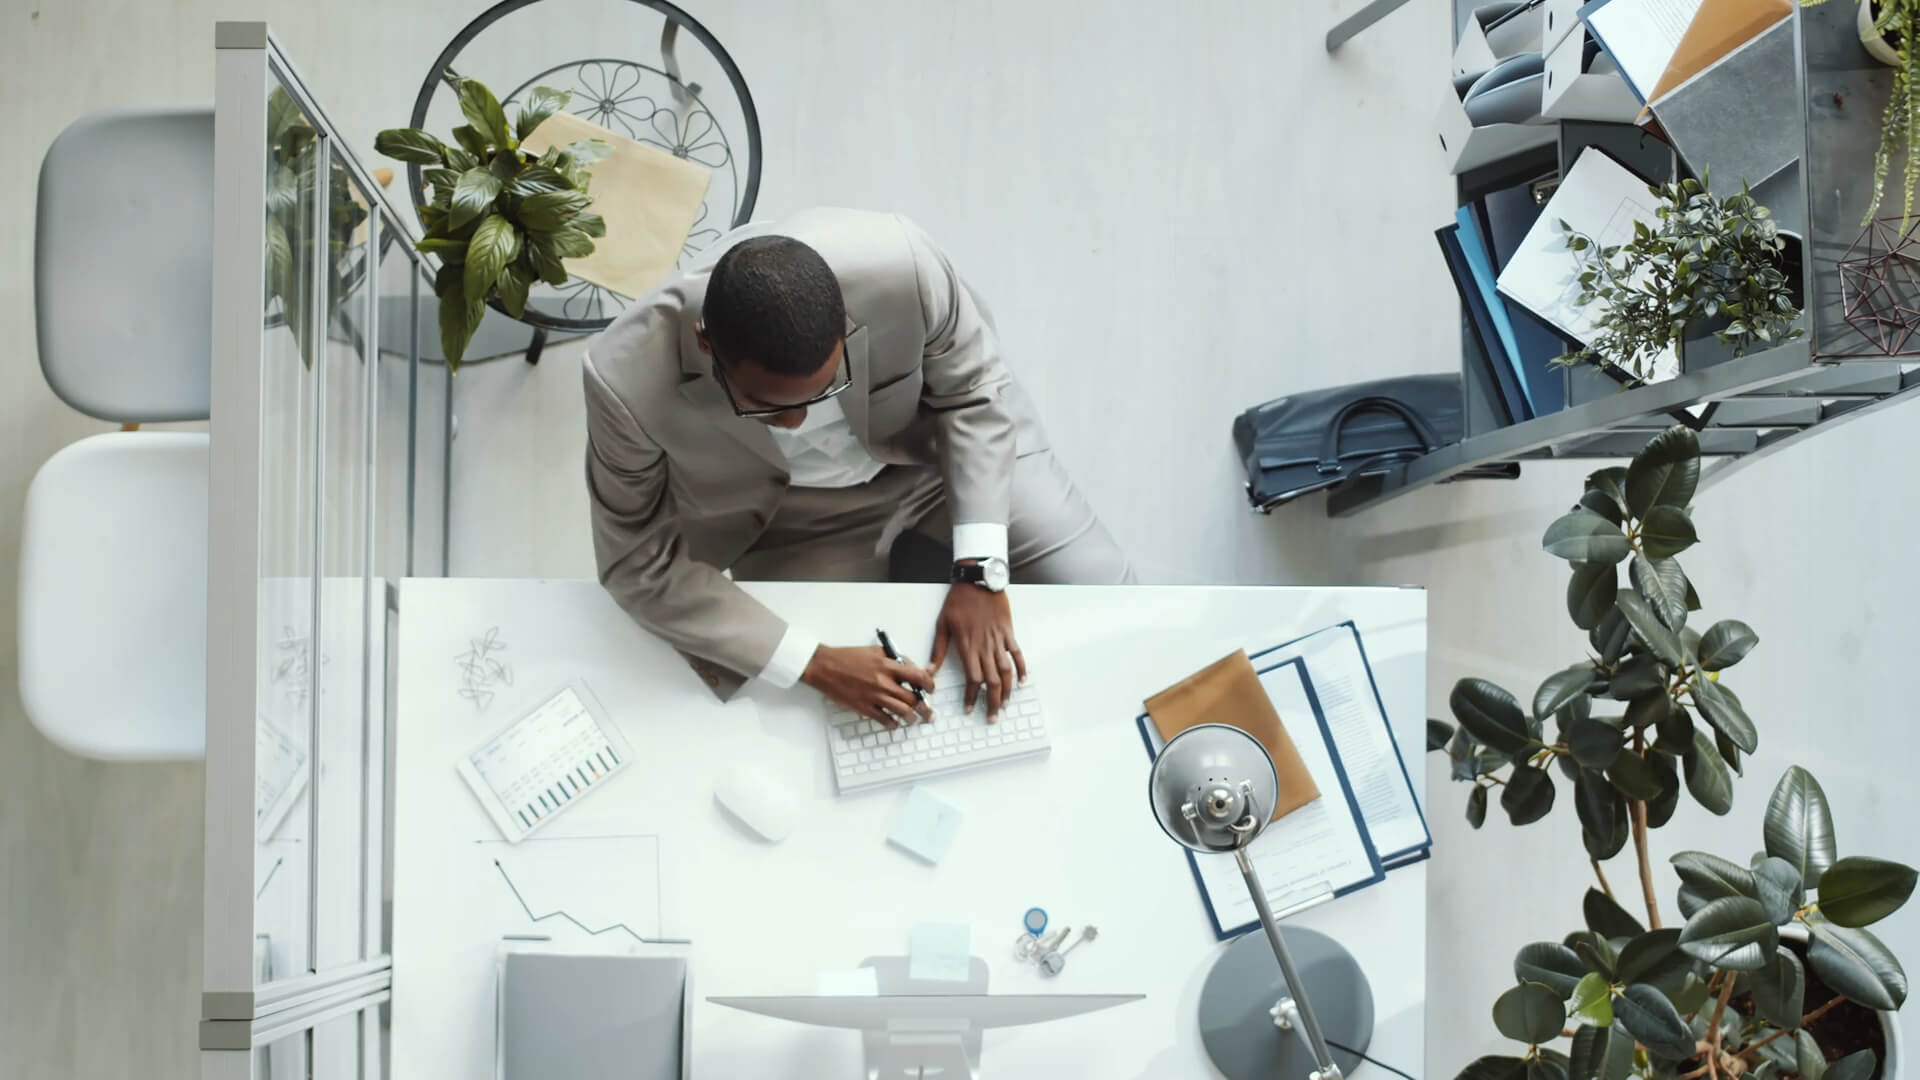 A businessman works in his office